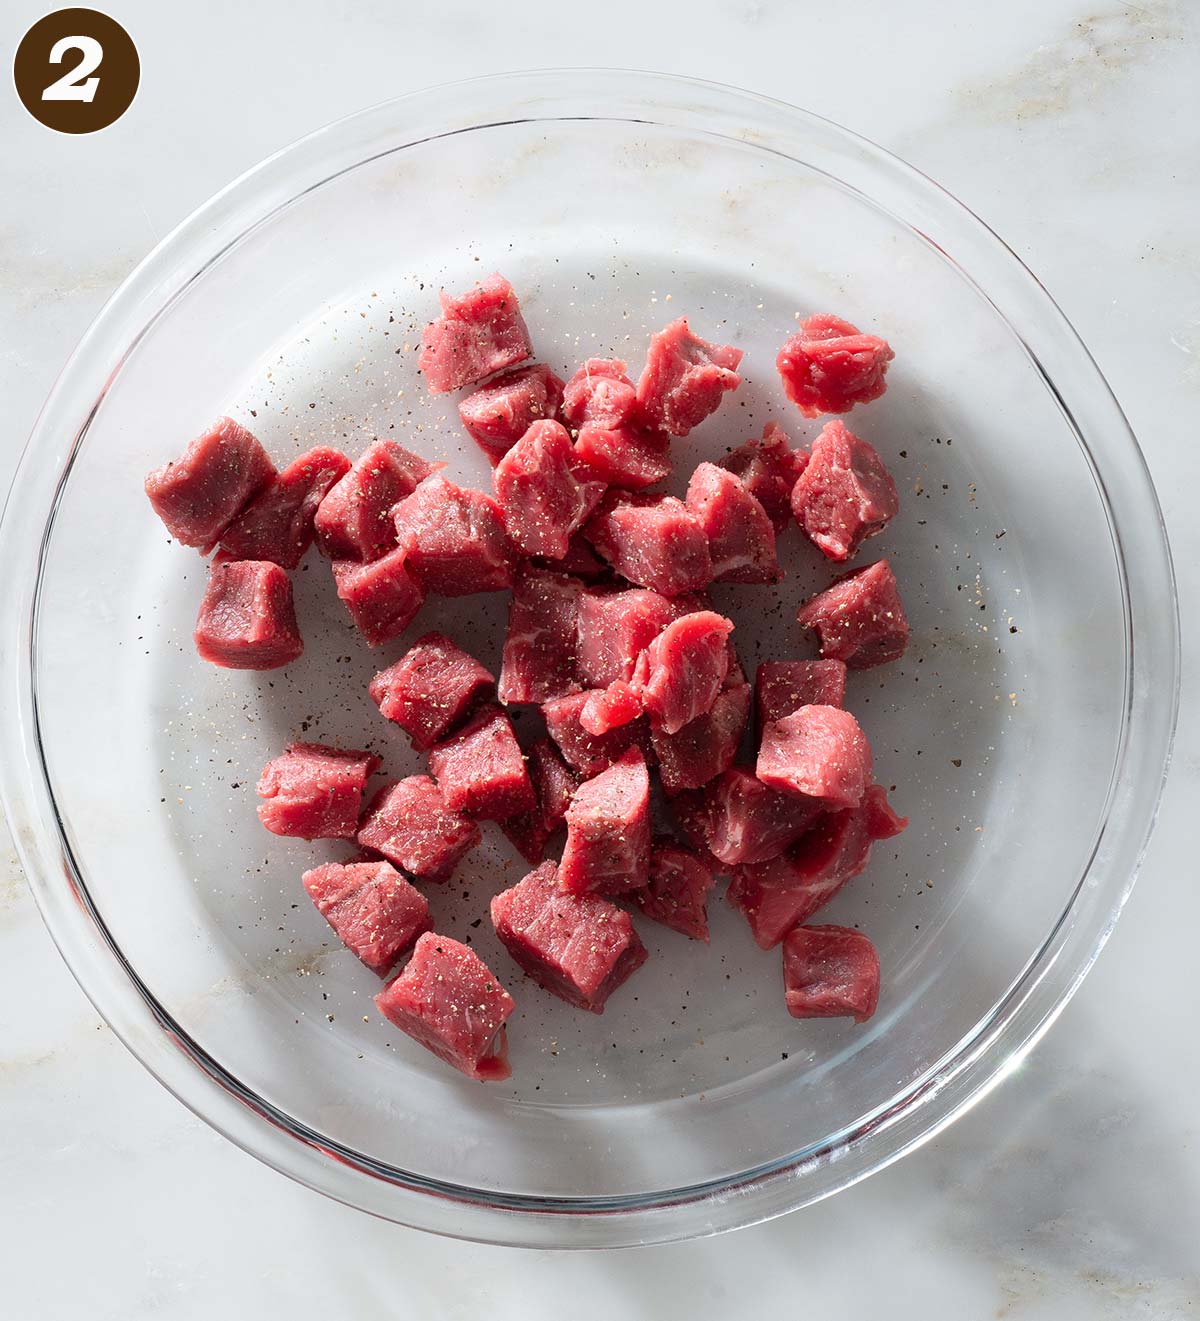 Raw beef chunks on a glass plate.